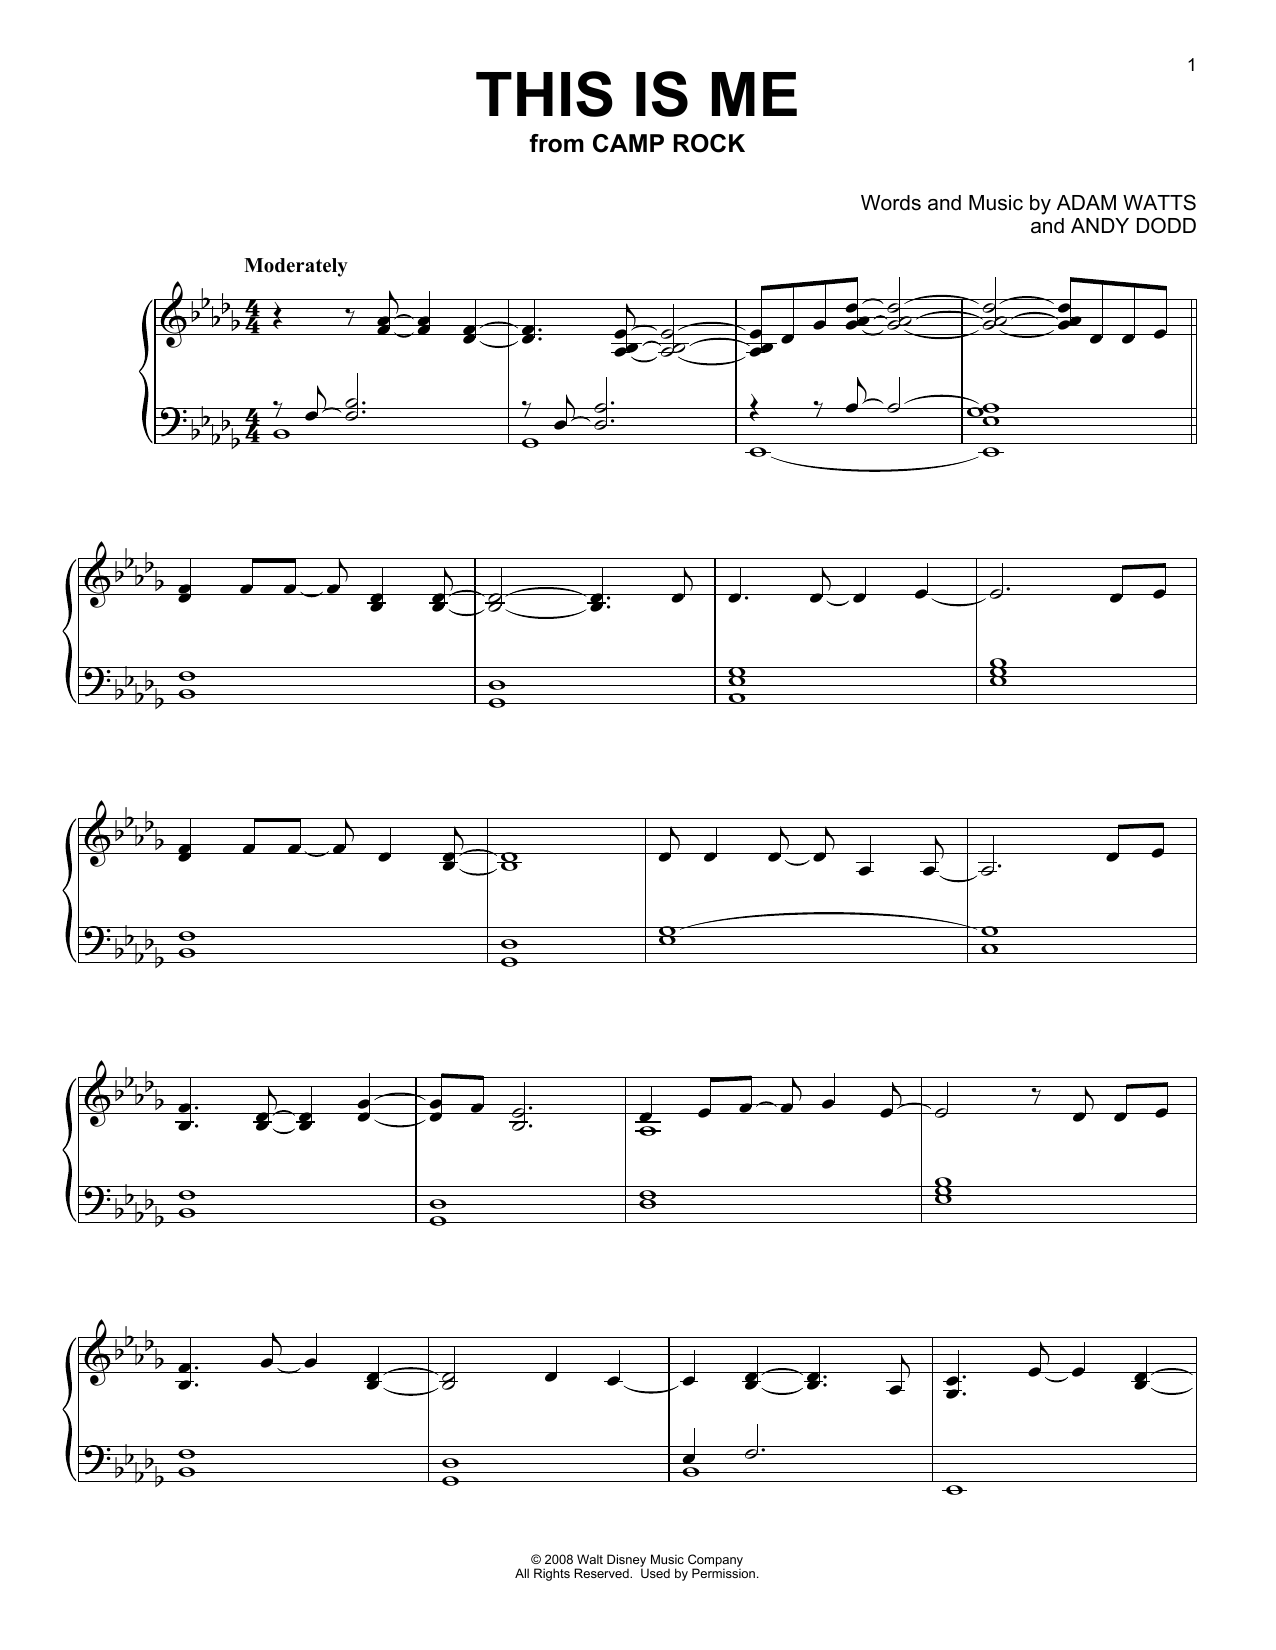 Download Demi Lovato & Joe Jonas This Is Me (from Camp Rock) Sheet Music